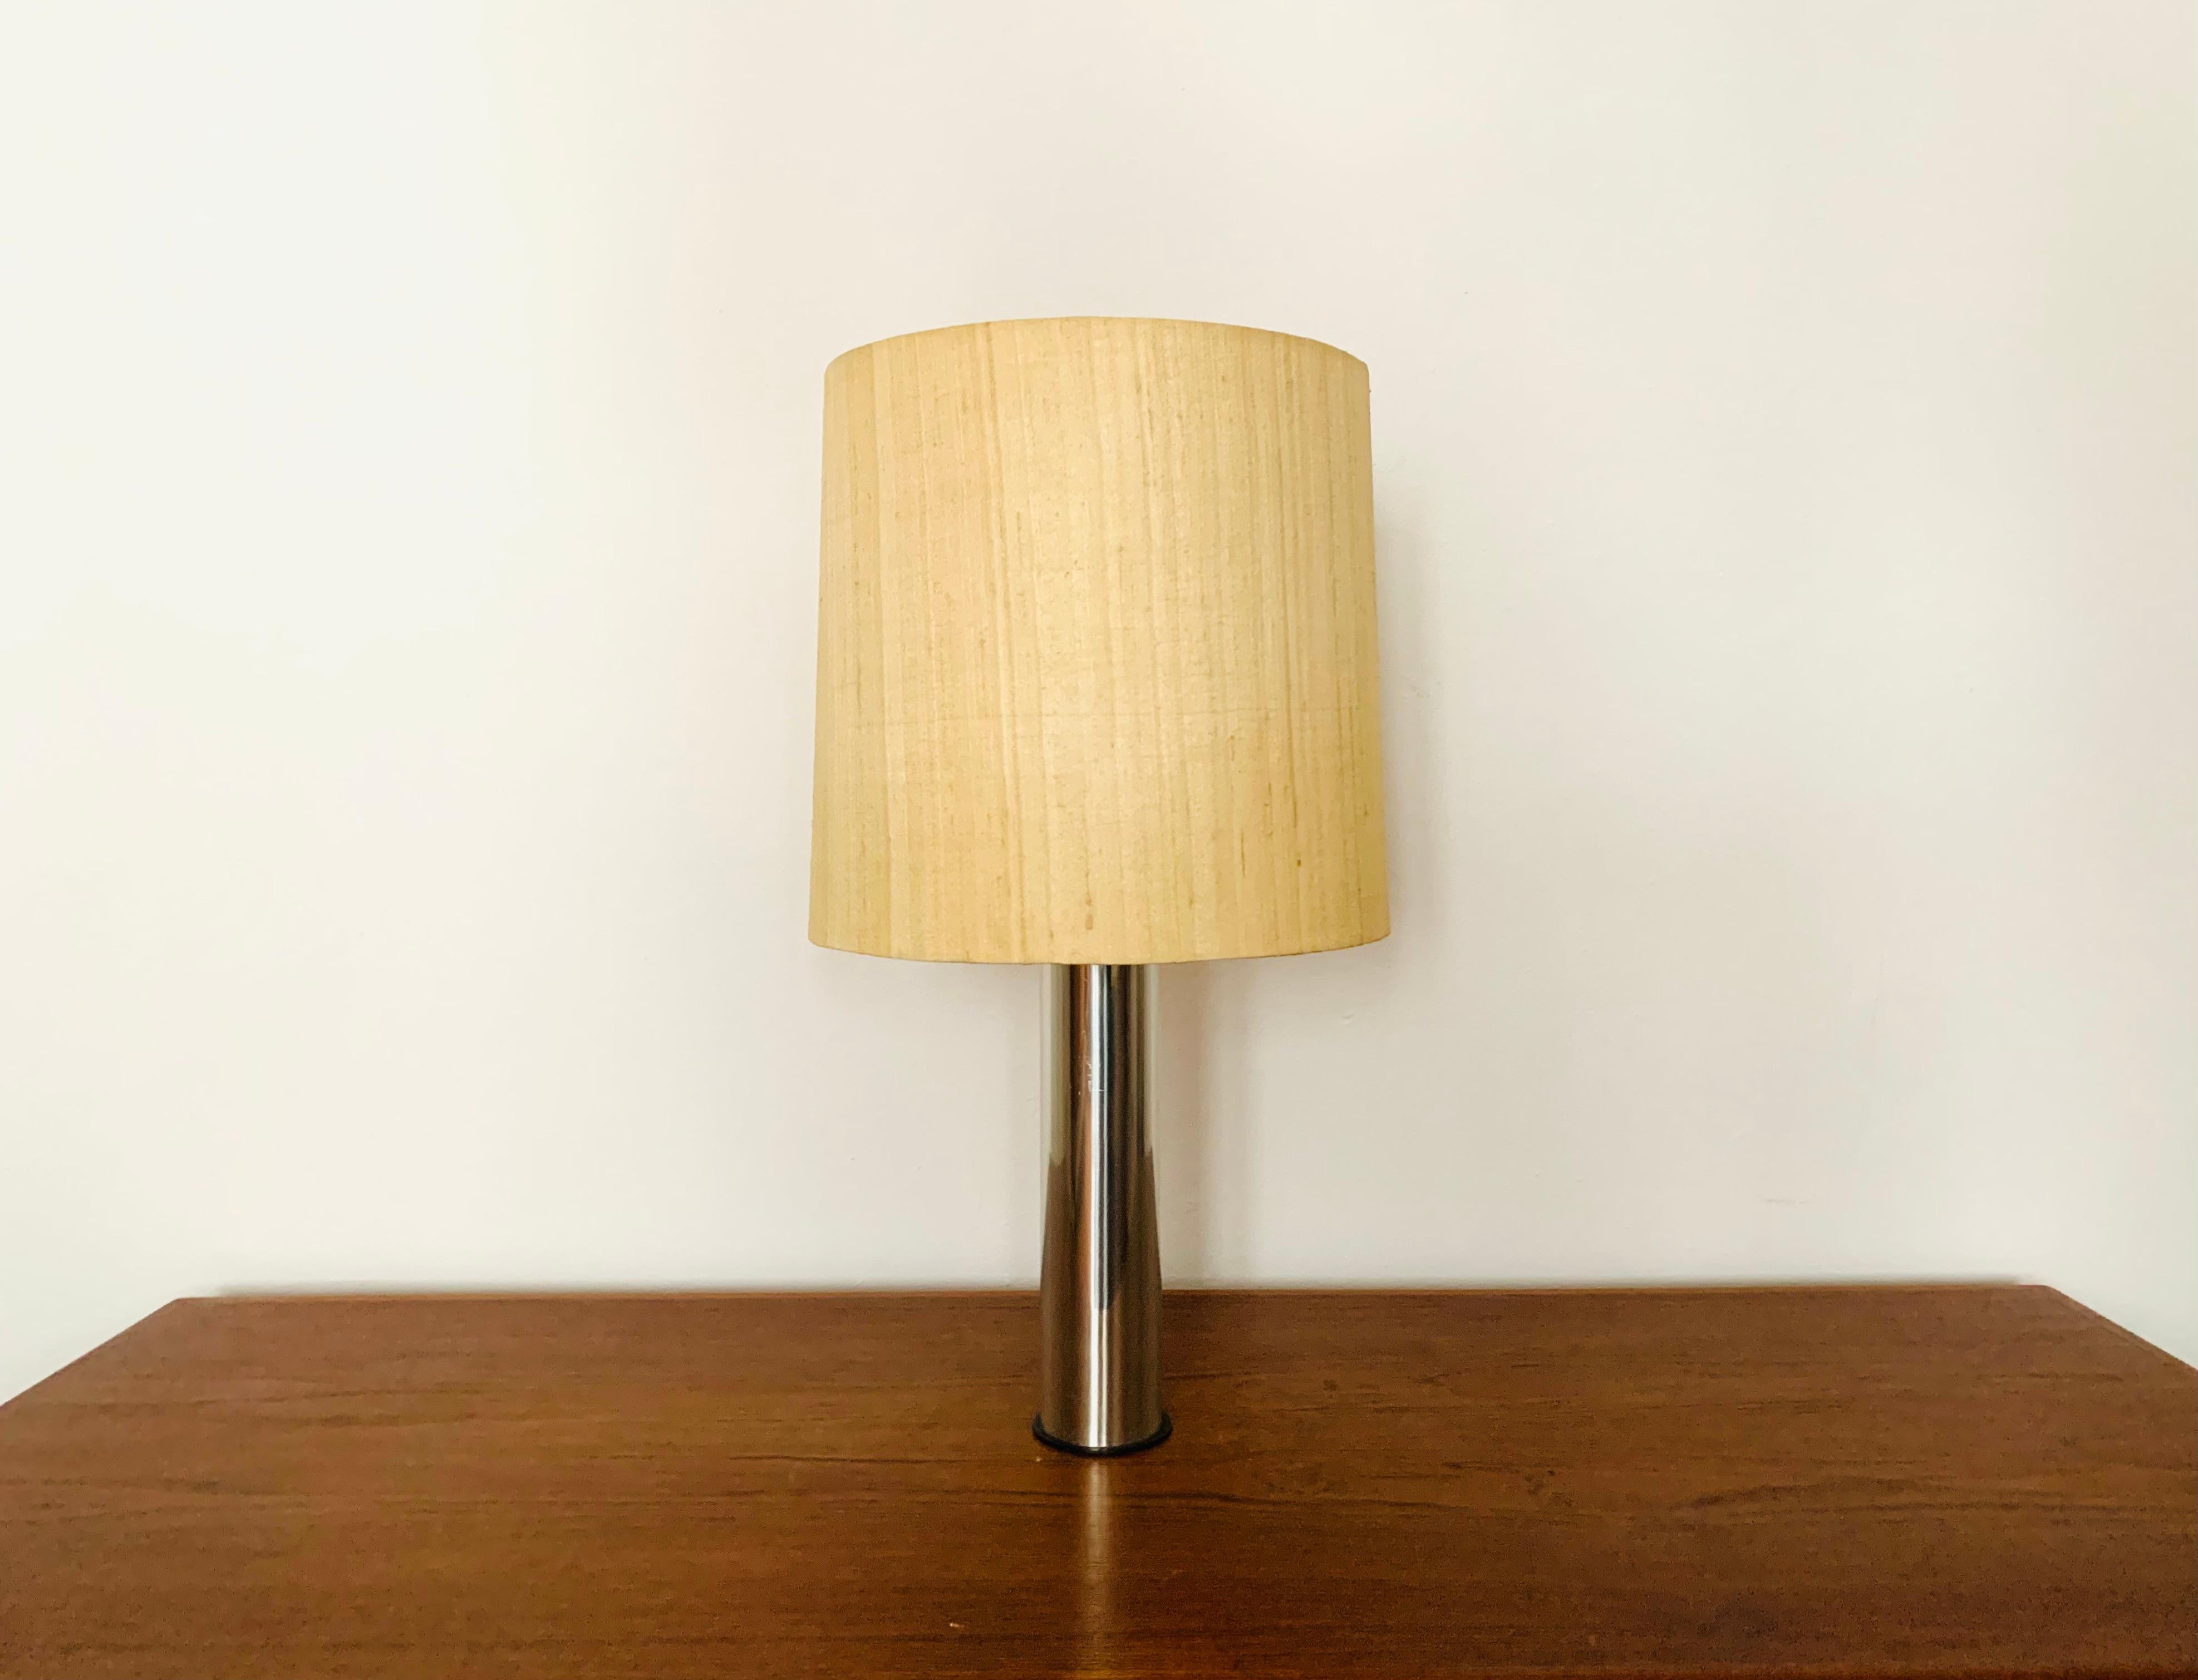 Large and beautiful table lamp from the 1960s.
Impressive design and very high-quality workmanship.
The lighting effect of the lamp is extremely beautiful.

Condition:

Very good vintage condition with slight signs of wear consistent with